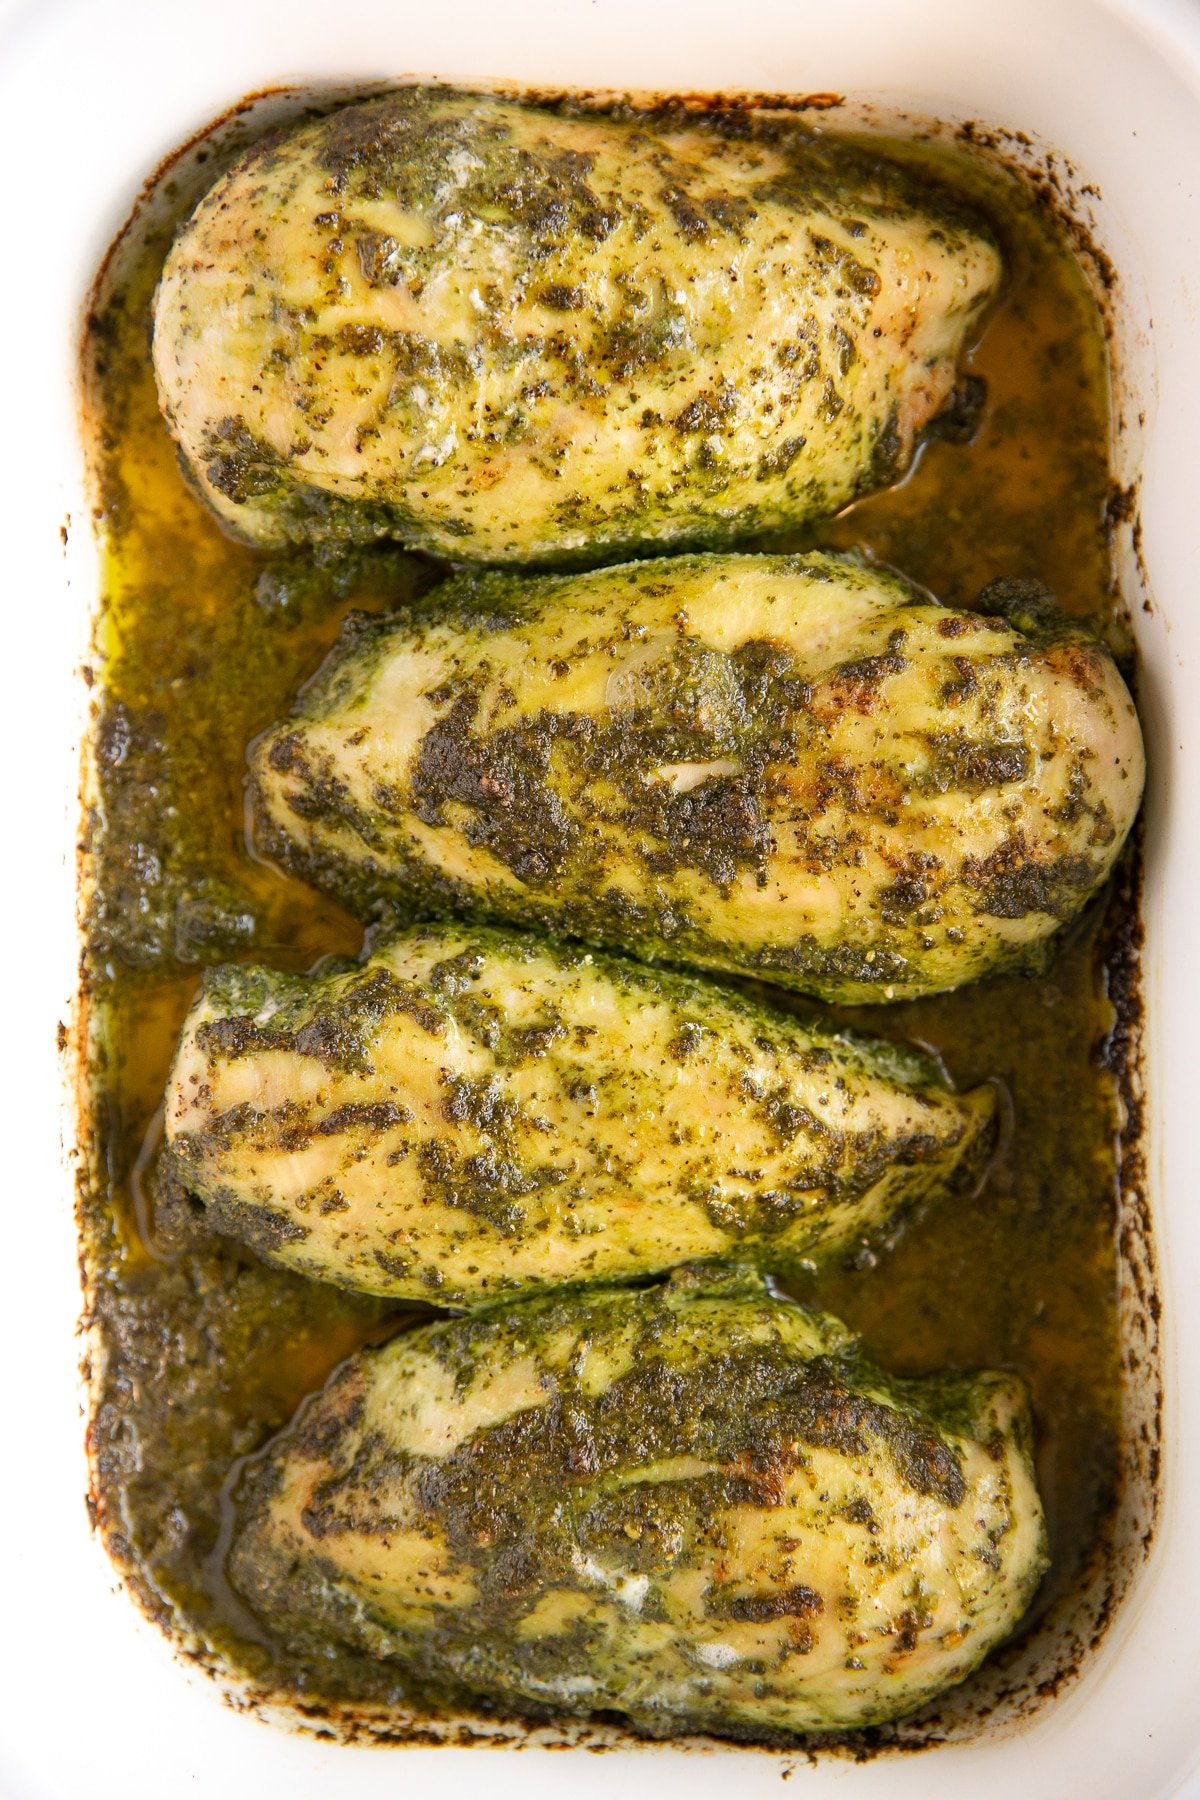 White baking dish with four chicken breasts cooked in homemade pesto sauce.